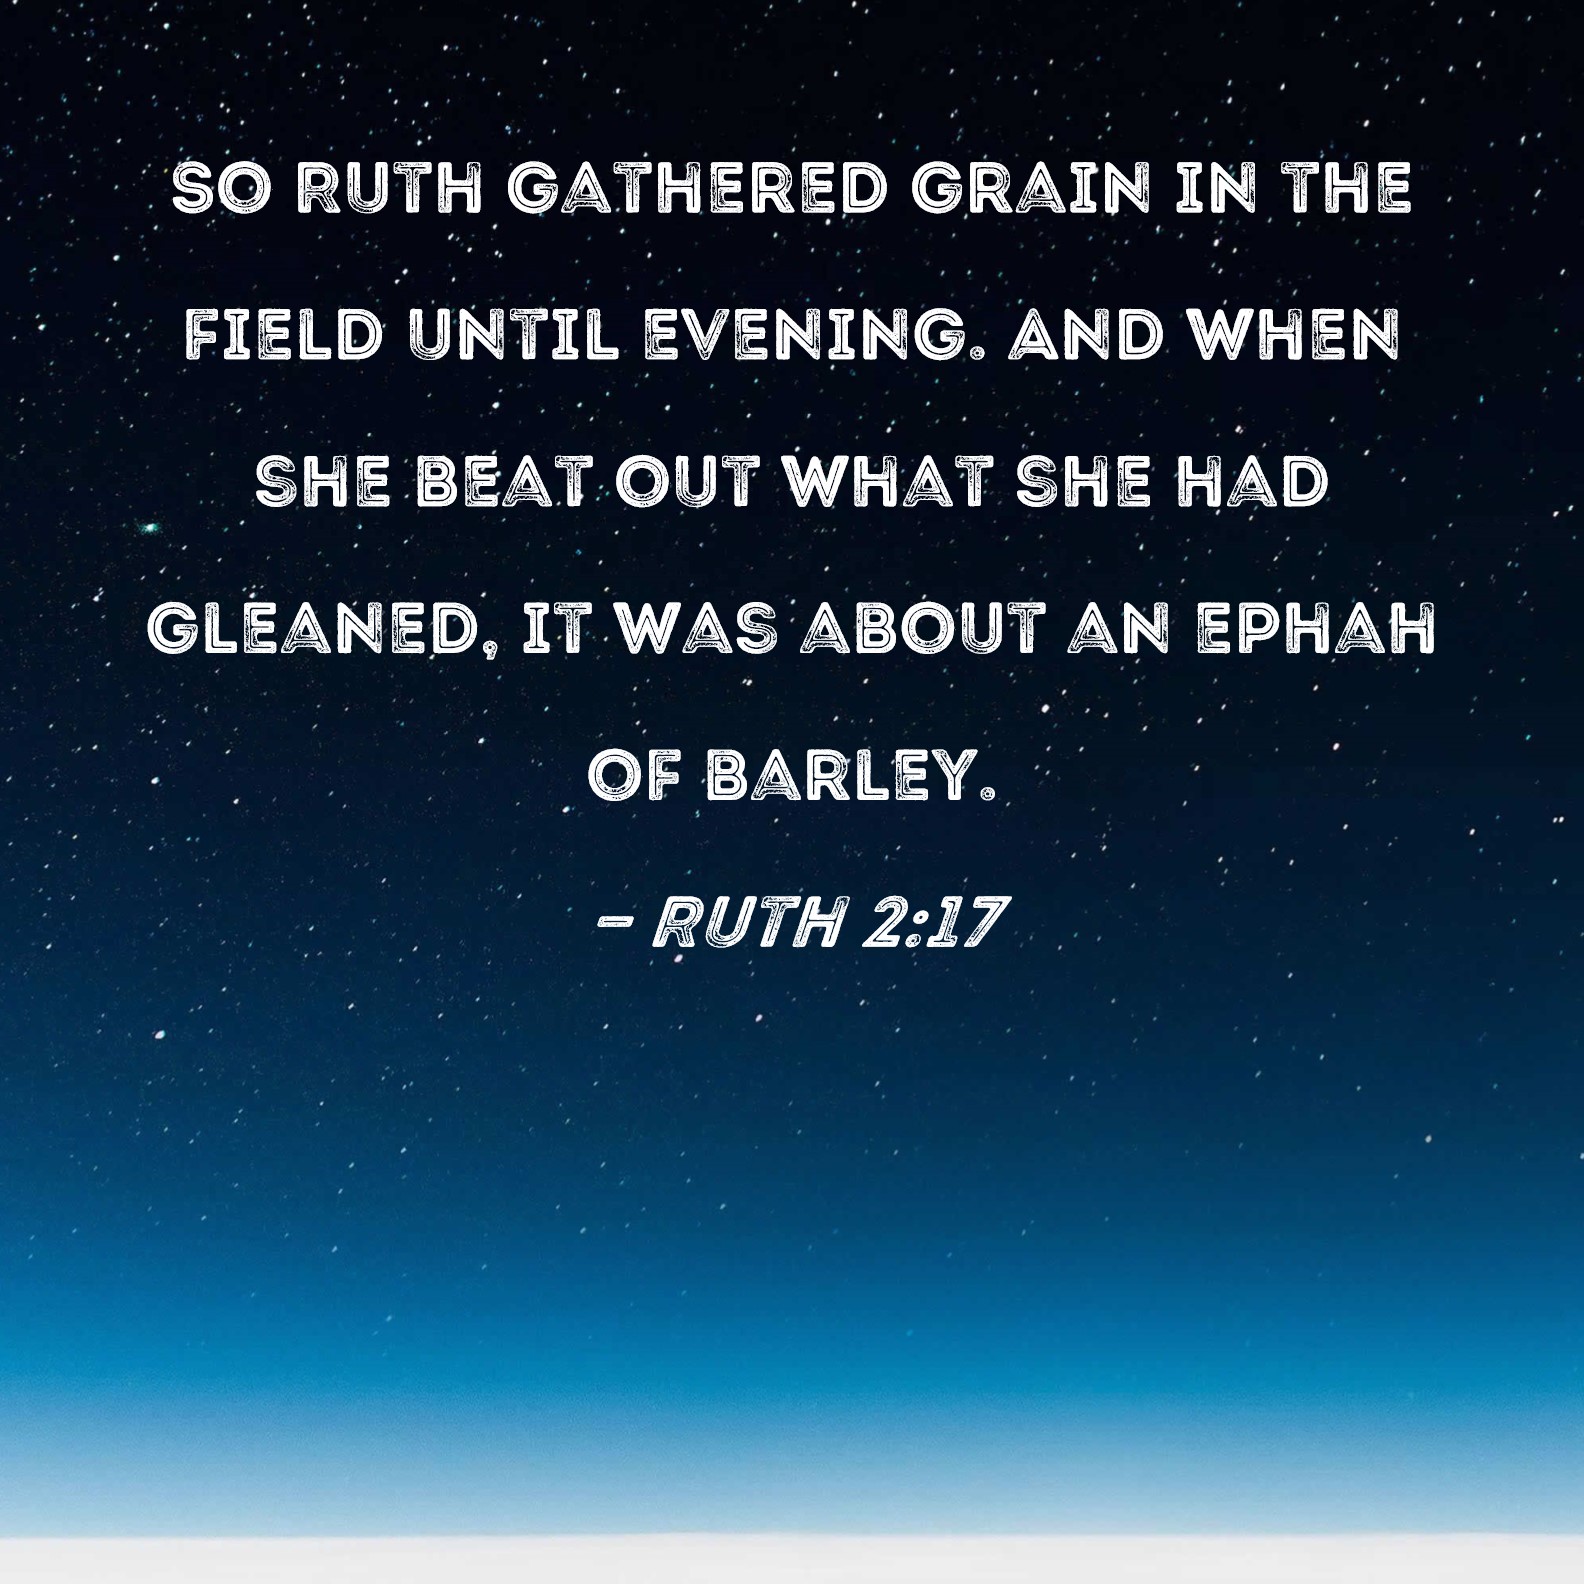 Ruth 2:17 So Ruth gathered grain the field evening. And when she beat out what she had gleaned, it was about an ephah of barley.